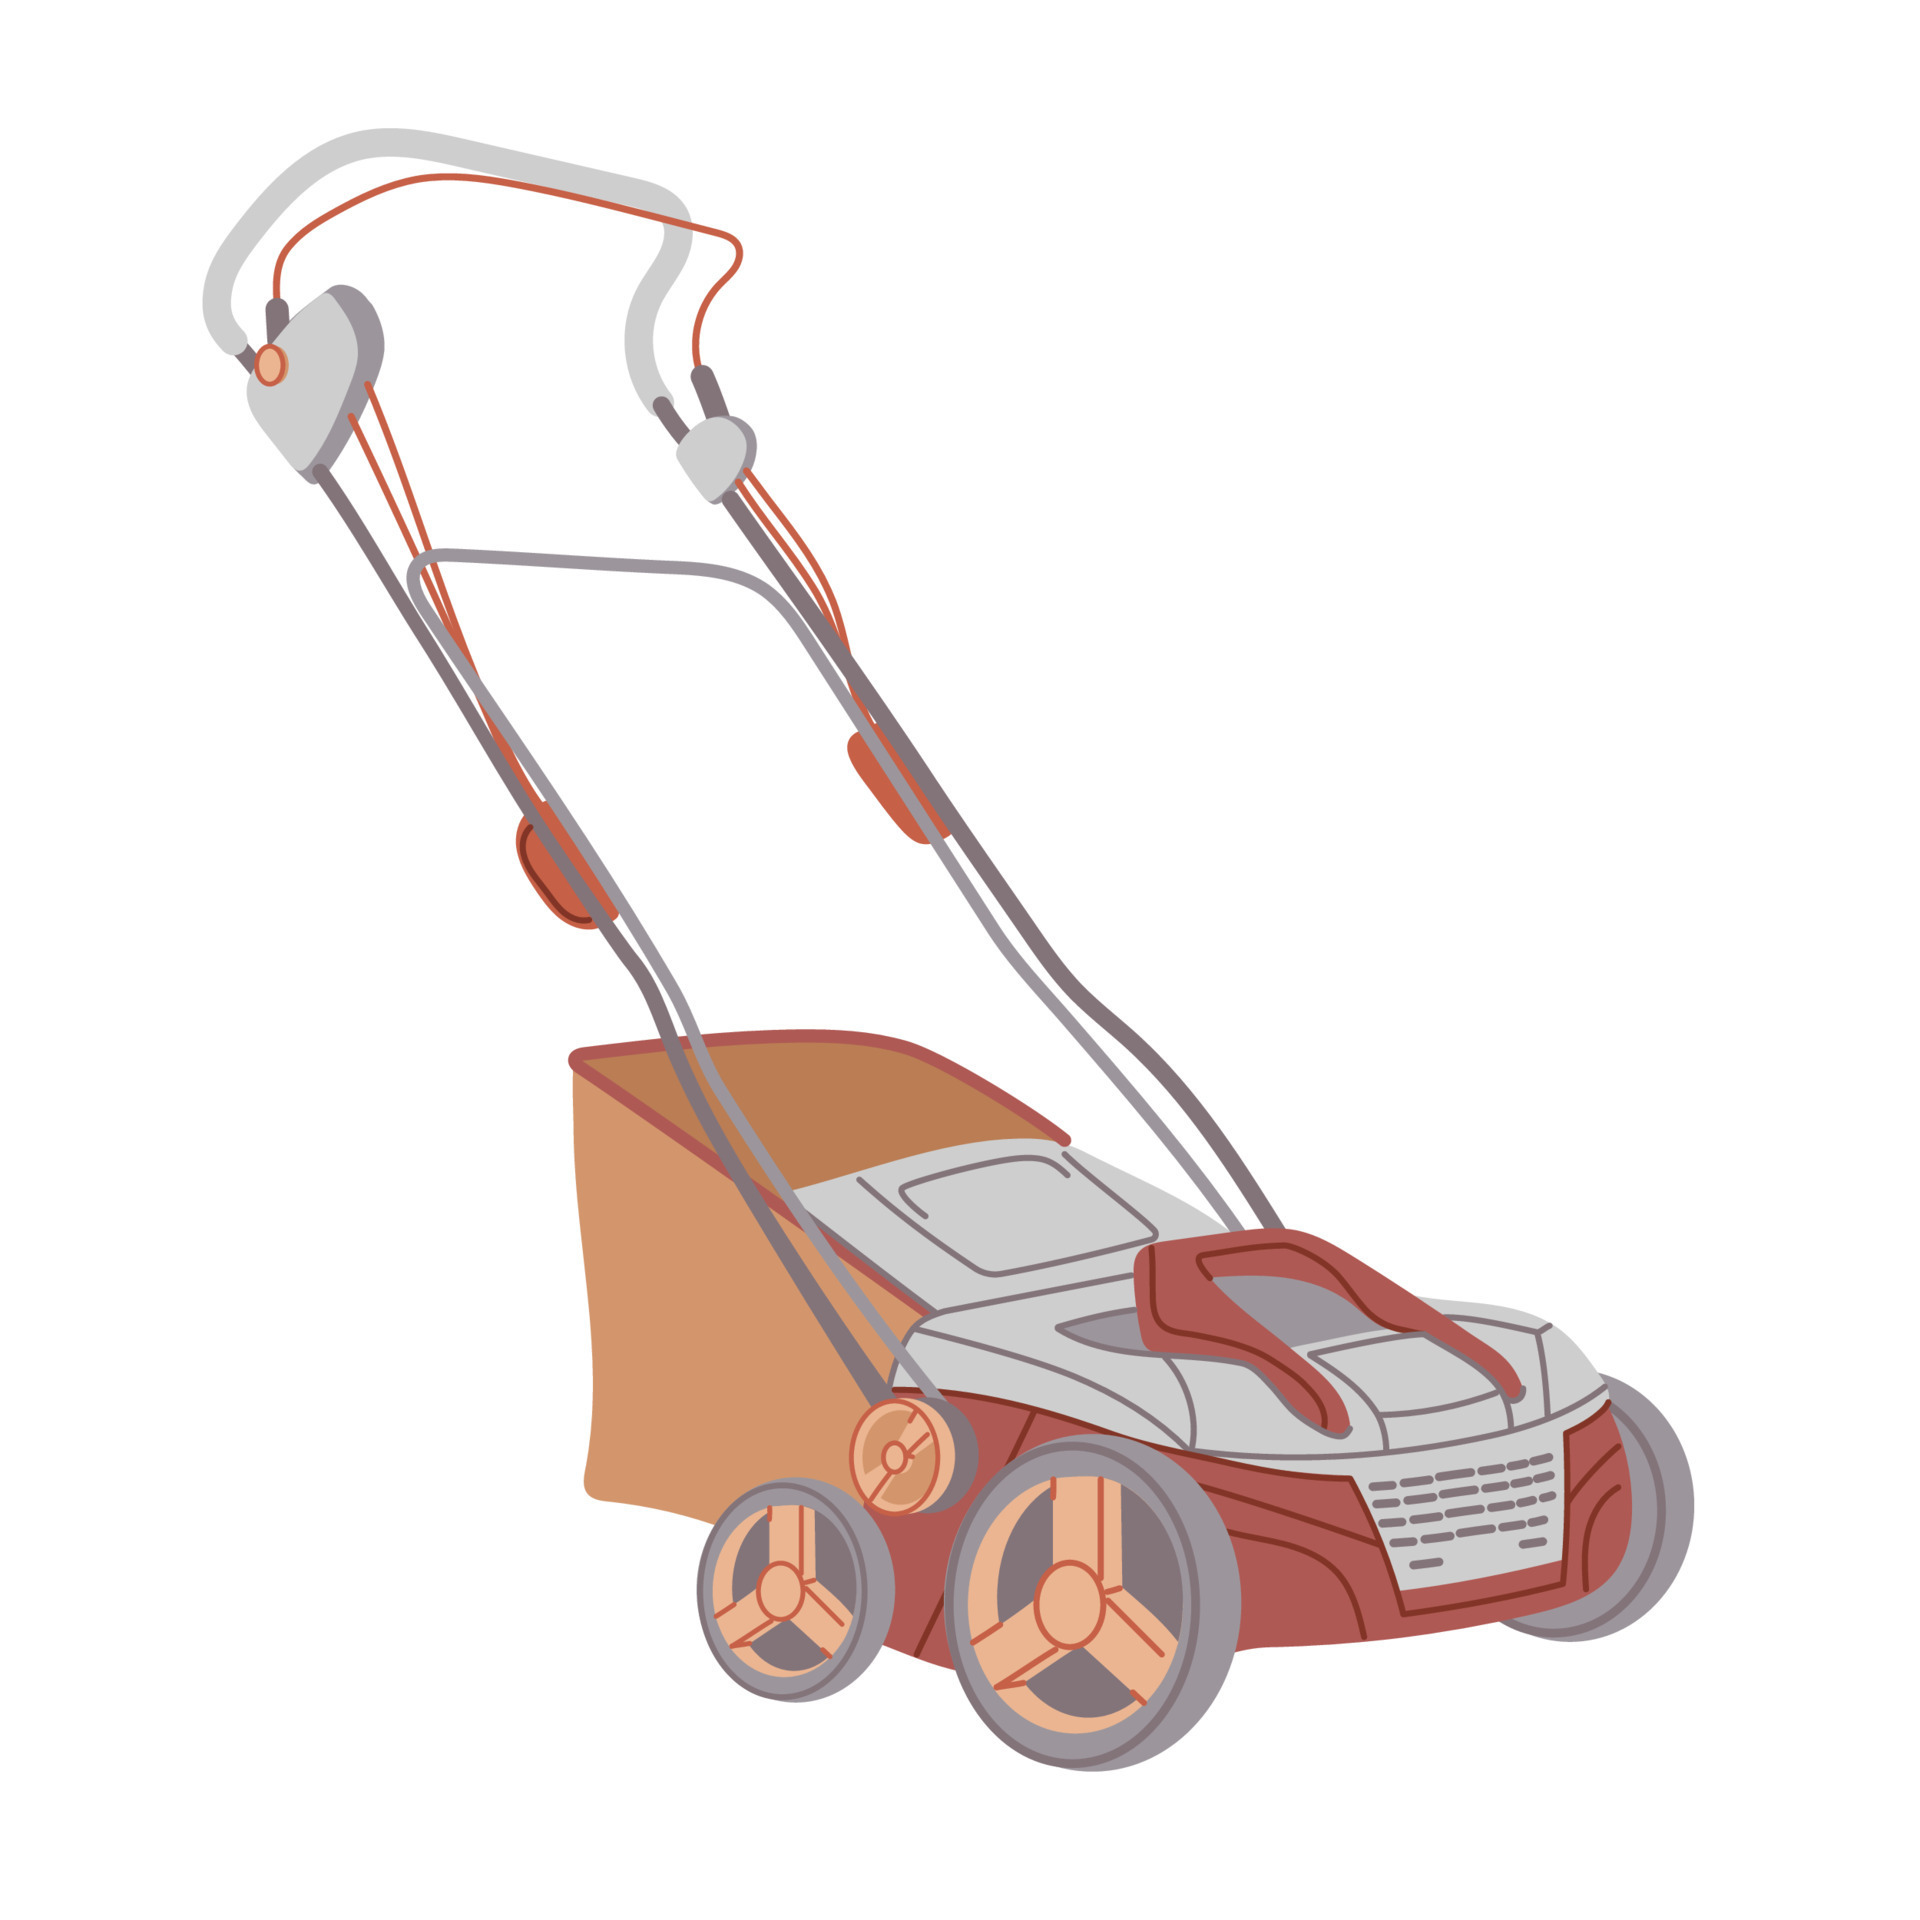 Push Lawn mower with a grass catcher. Hand drawn illustration of